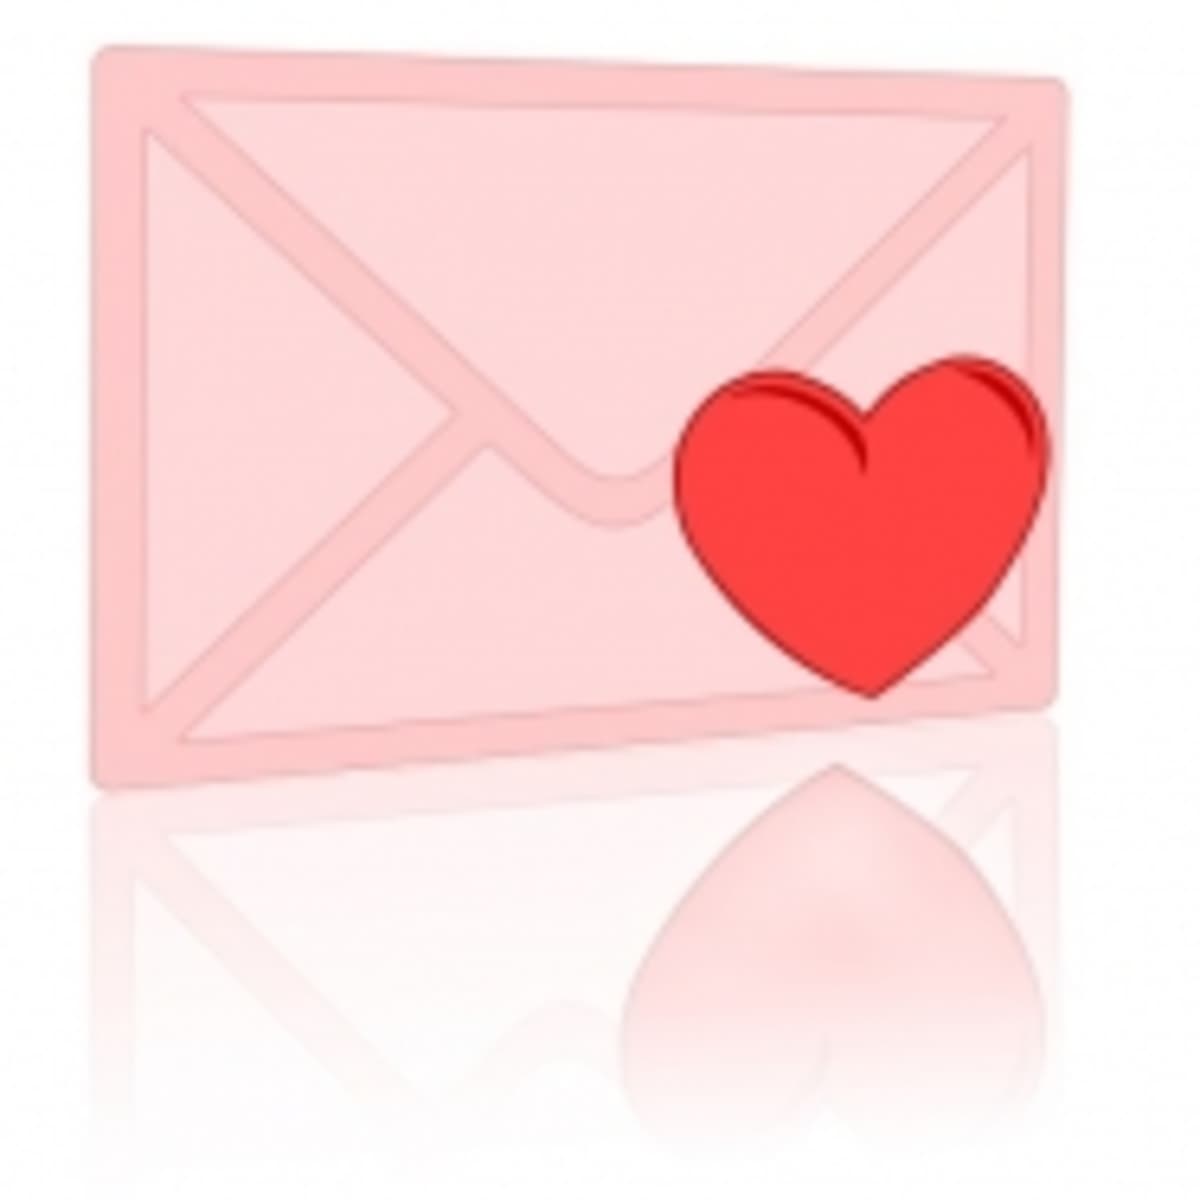 love letters for him from the heart examples